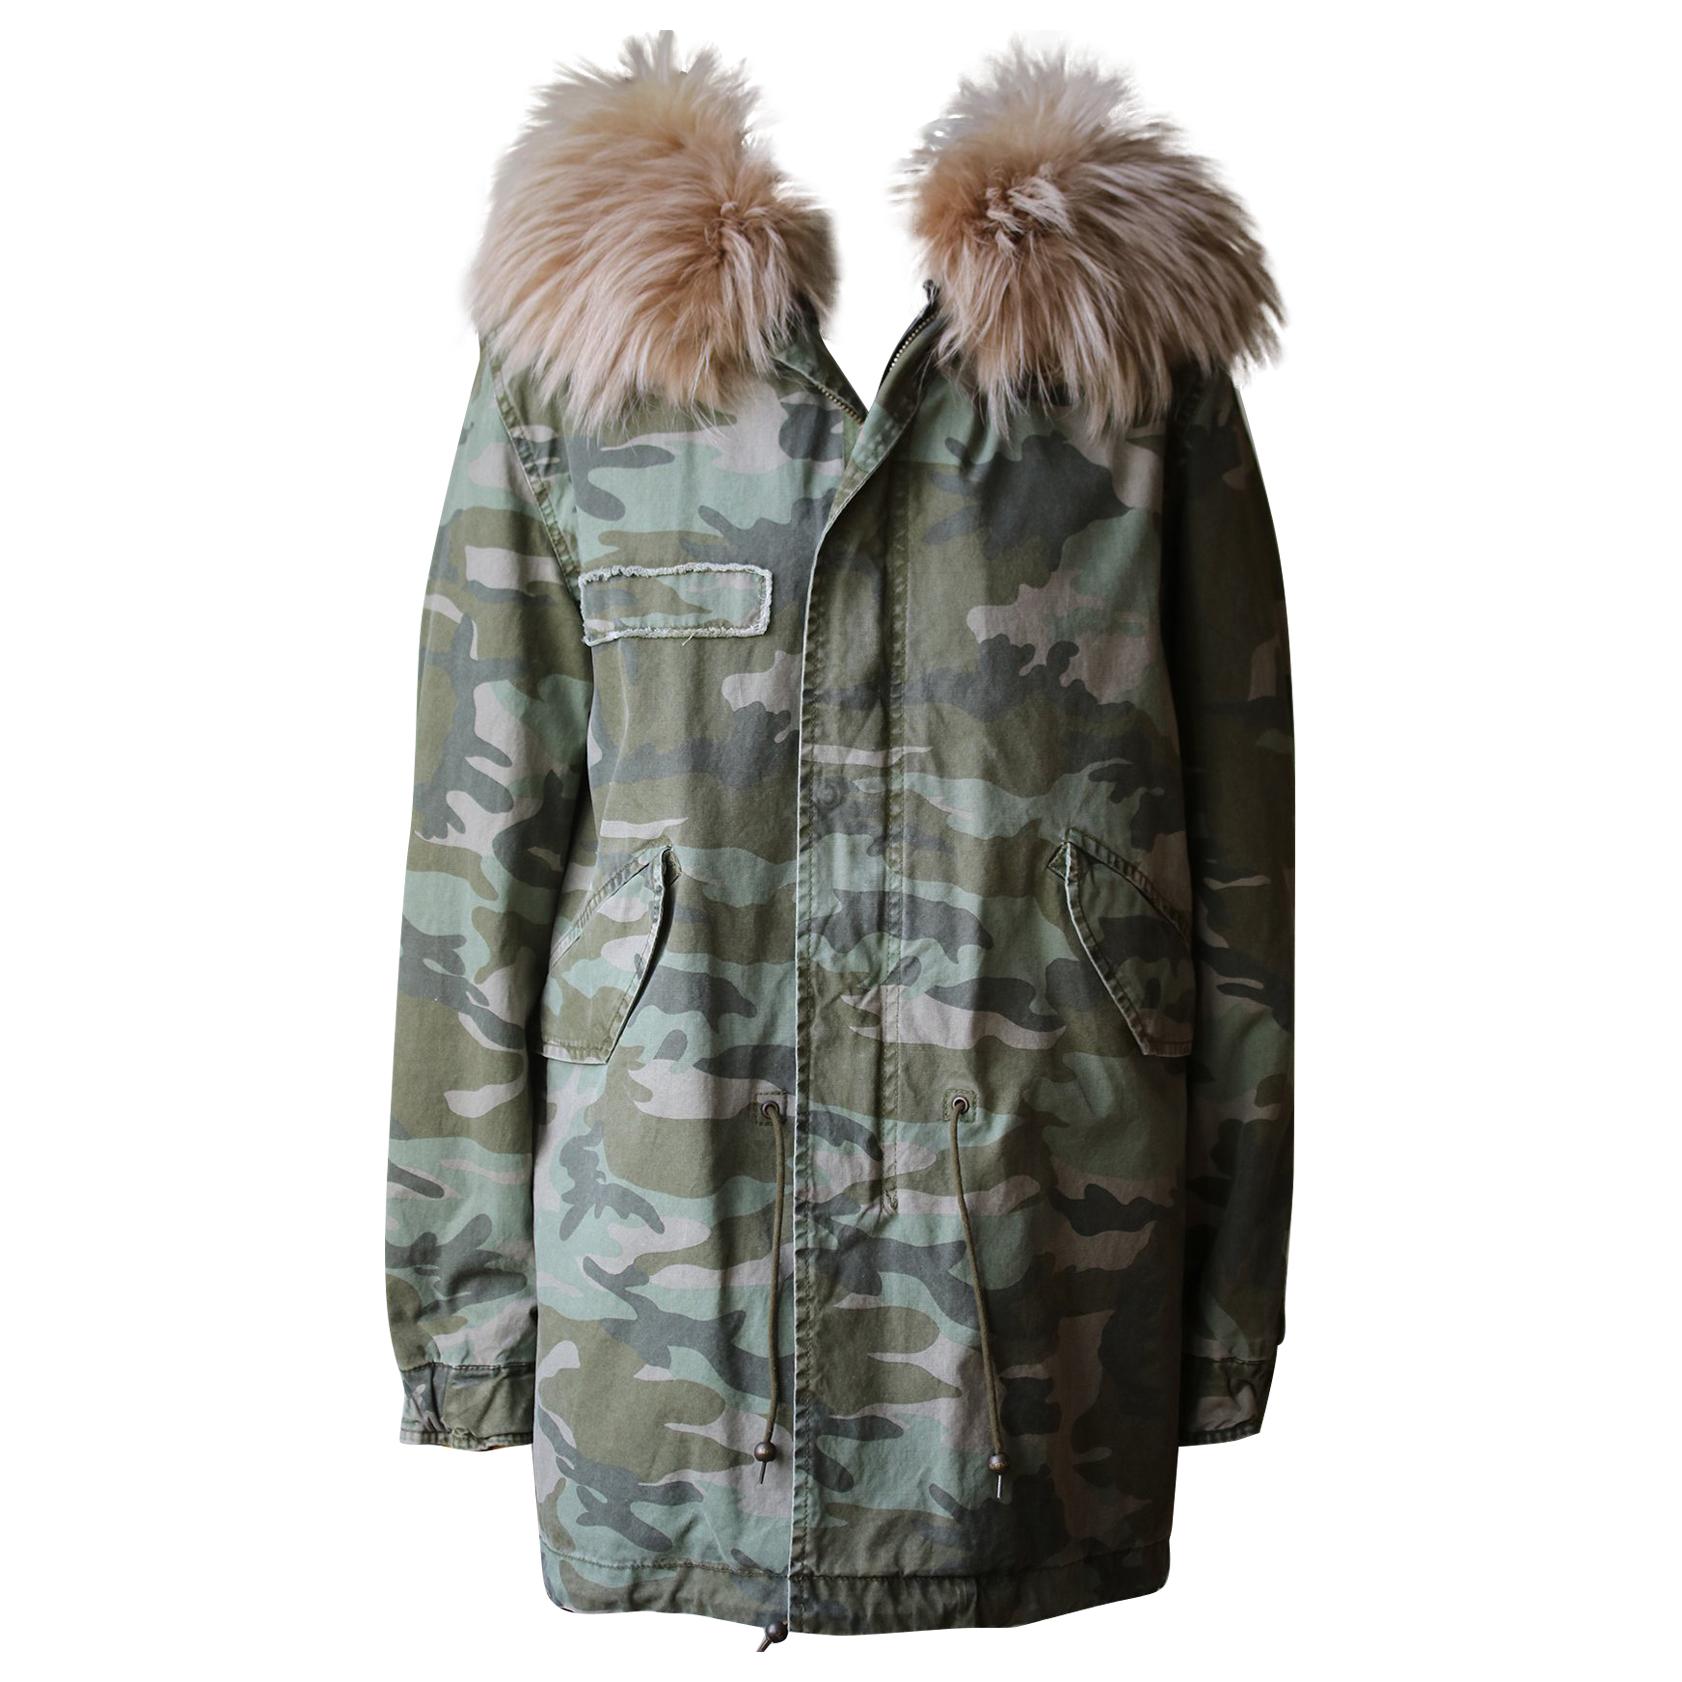 Mr and Mrs Italy Raccoon Fur Trimmed Camo Parka Jacket